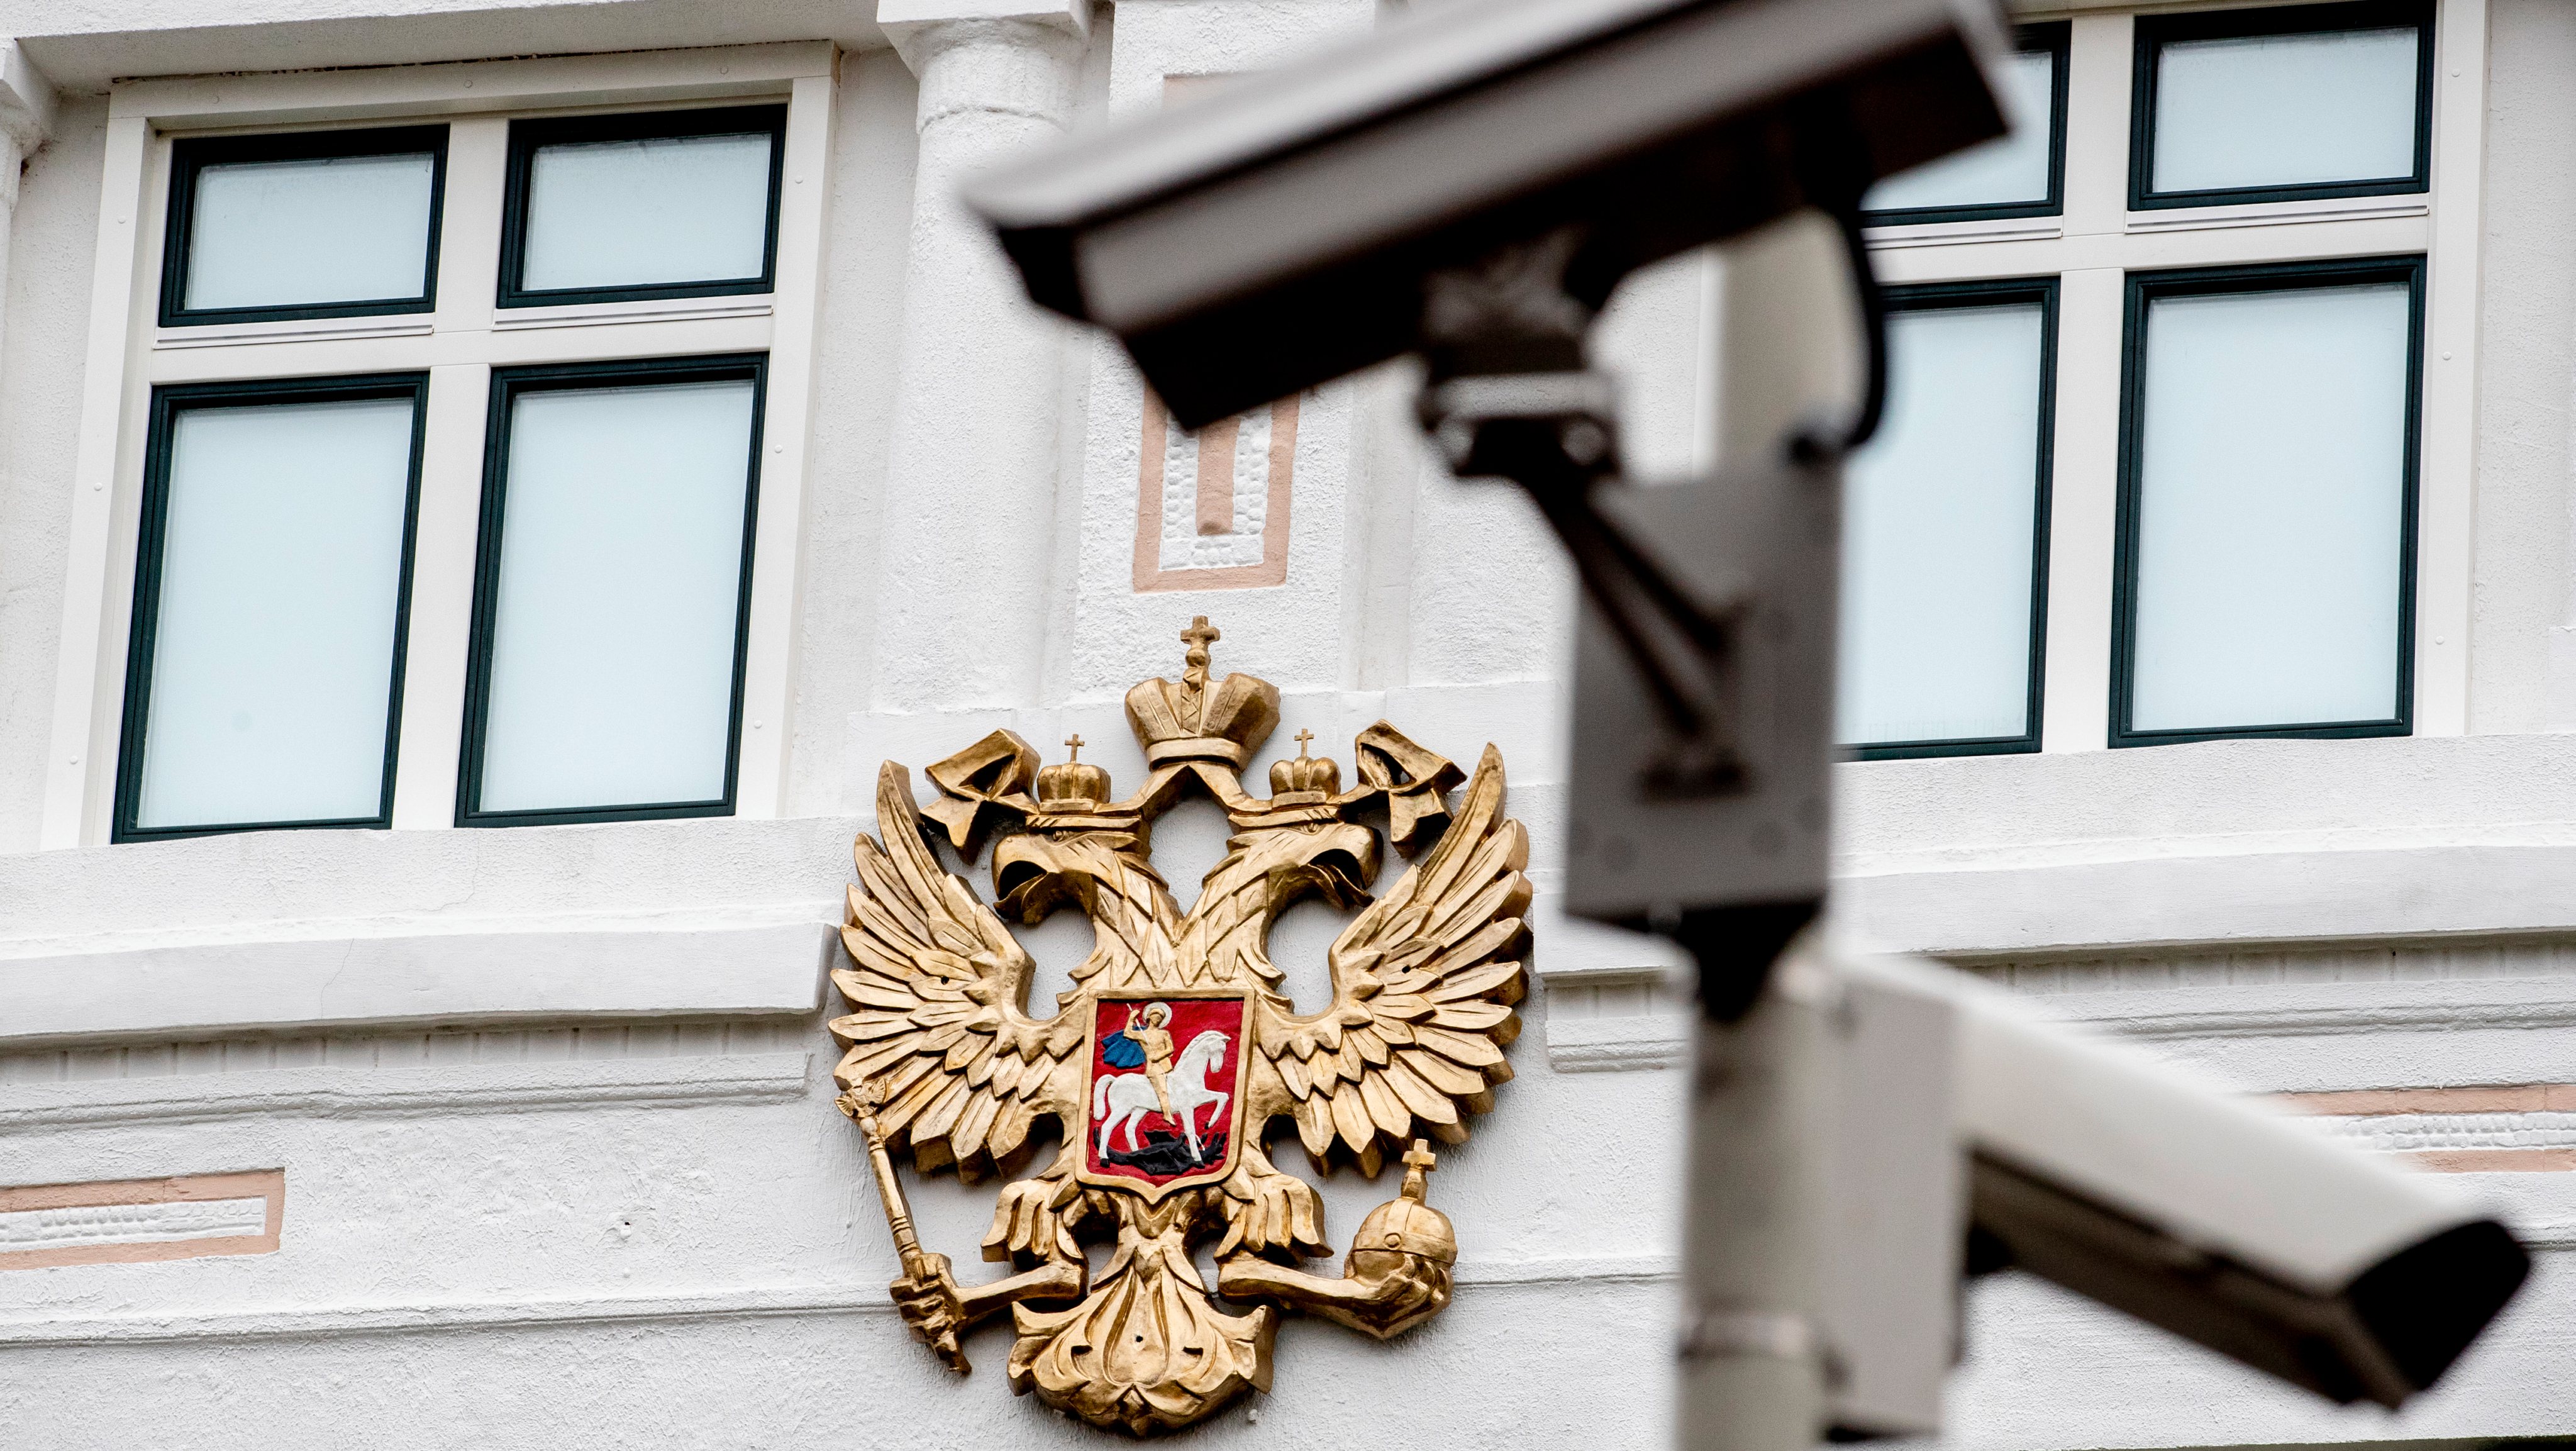 Two Russian diplomats expelled from Netherlands because of espionage